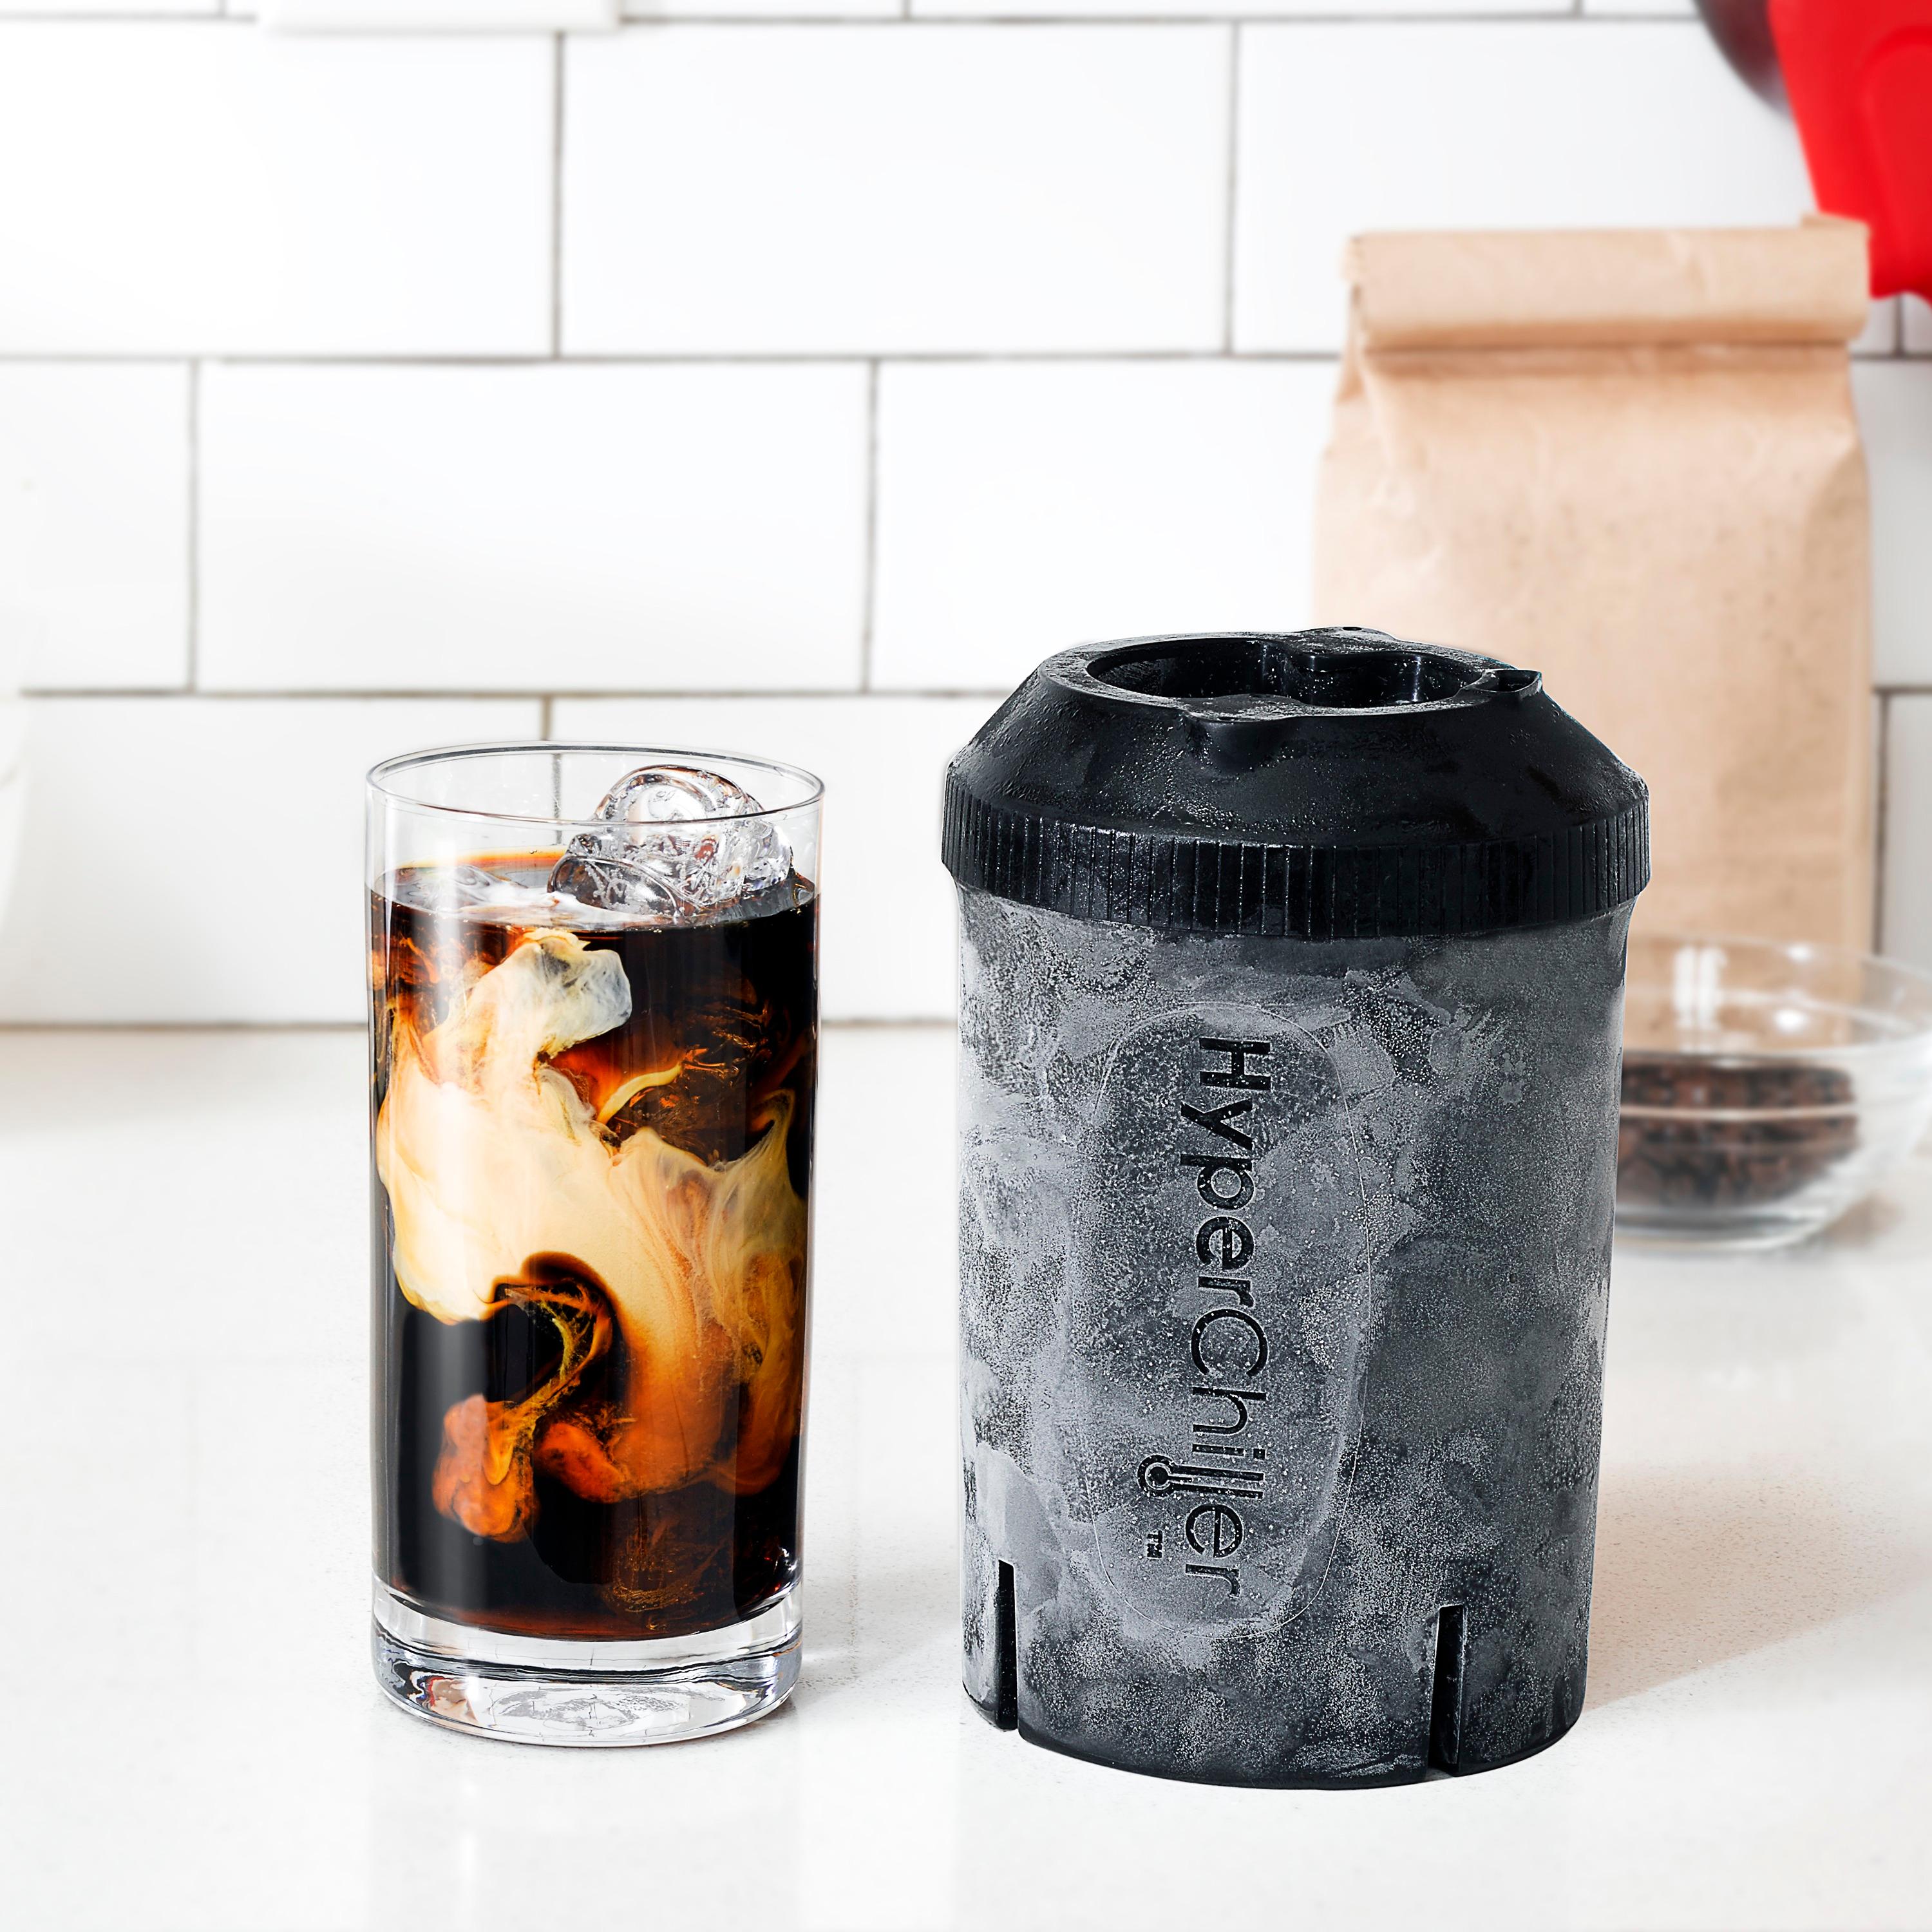 HyperChiller V2 Review: The Best Iced Coffee Maker? - Coffee Brew